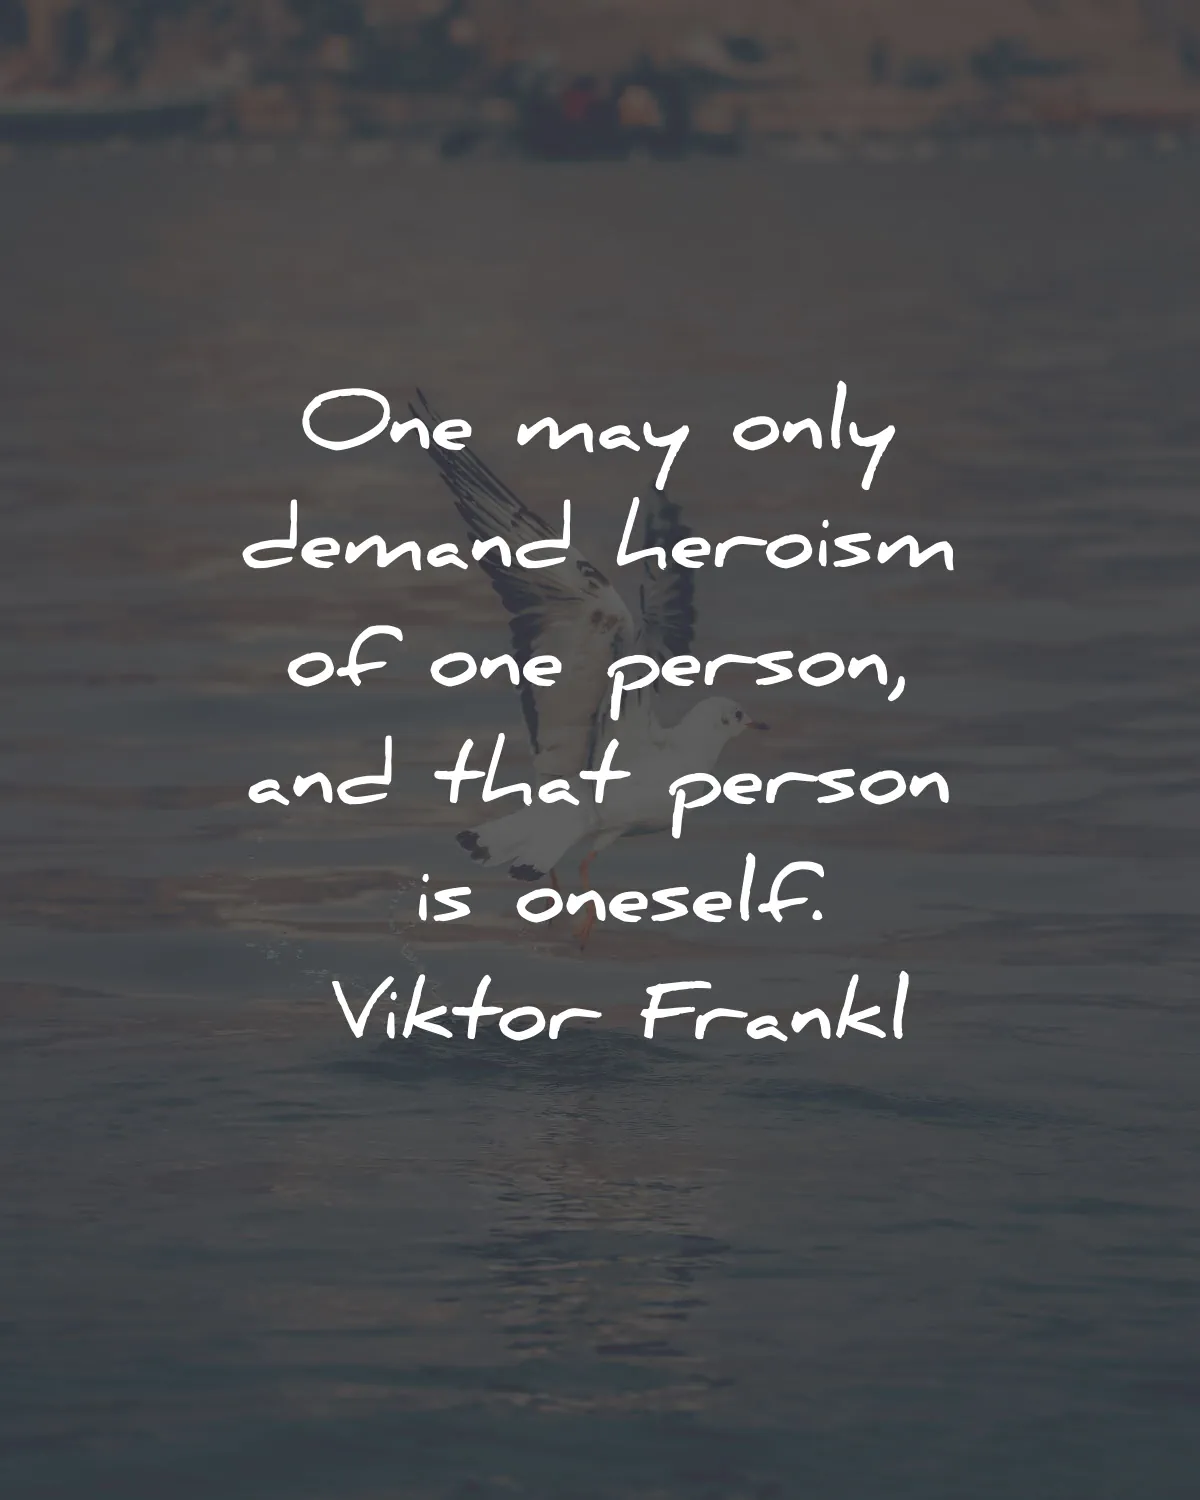 mans search for meaning quotes viktor frankl demand heroism oneself wisdom